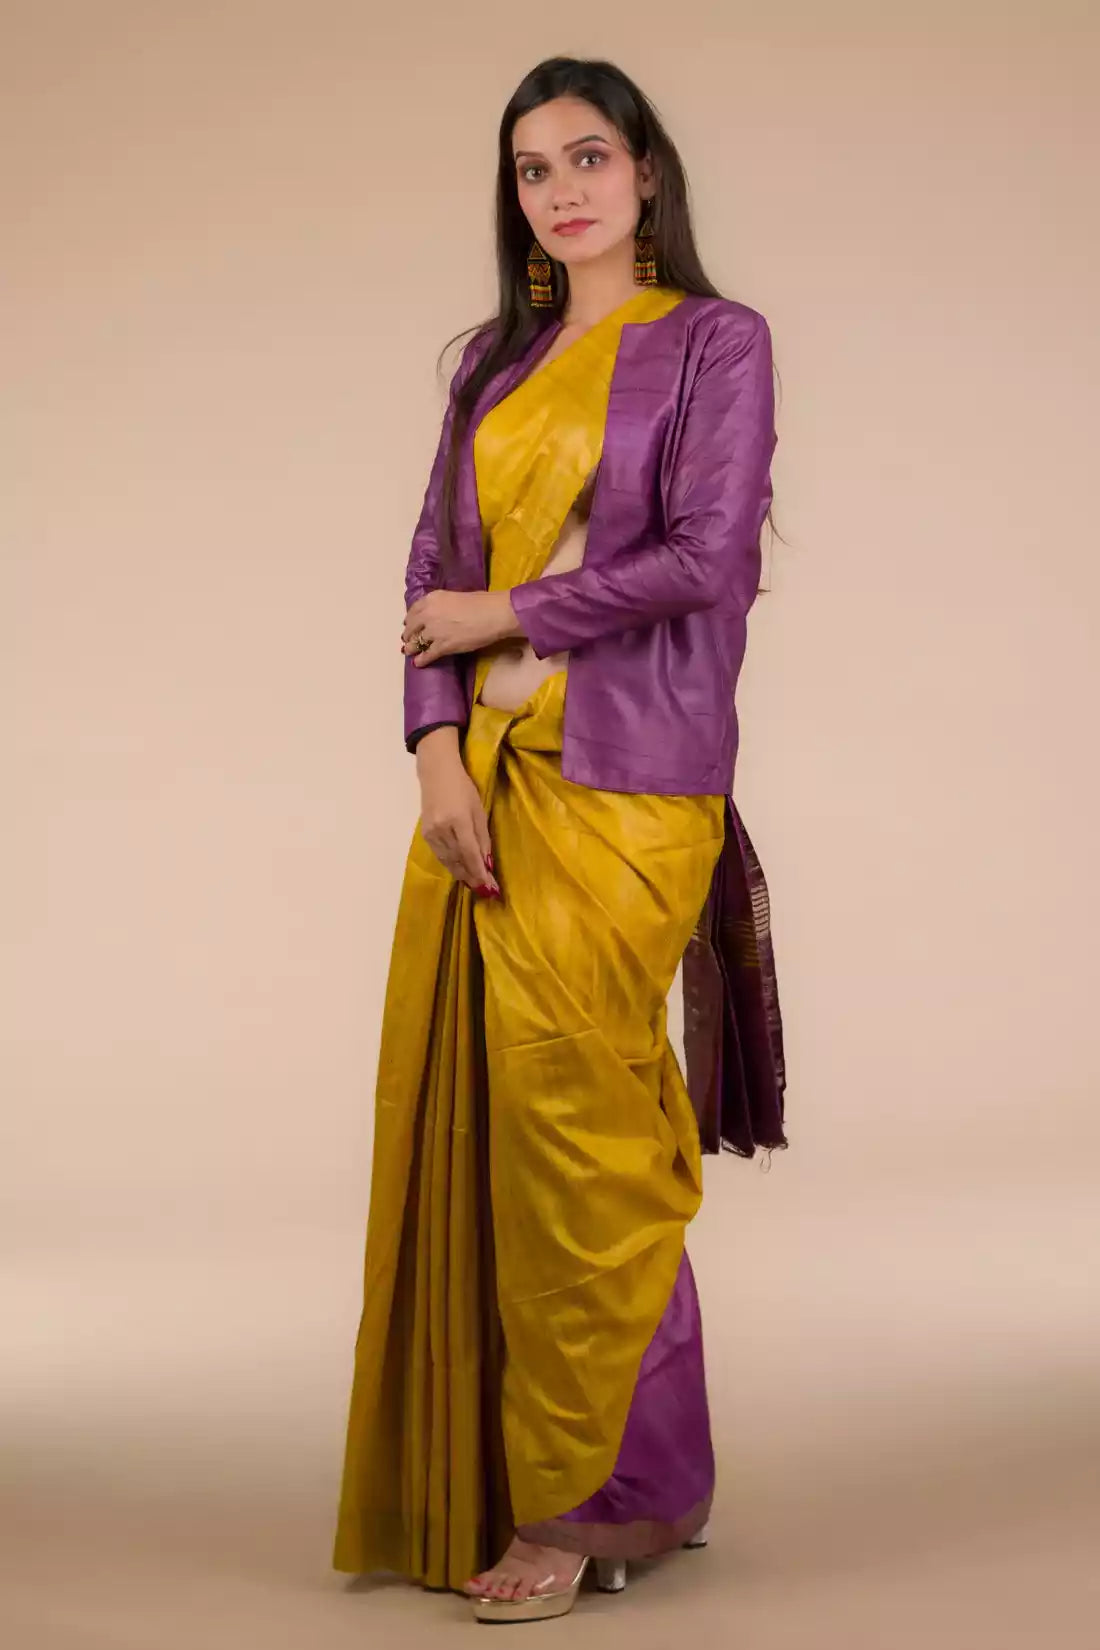  This is image of formal office wear saree which is in Mustard with purple border Plain In Pure Tussar with Ghicha Border Saree which is worn with a blazer